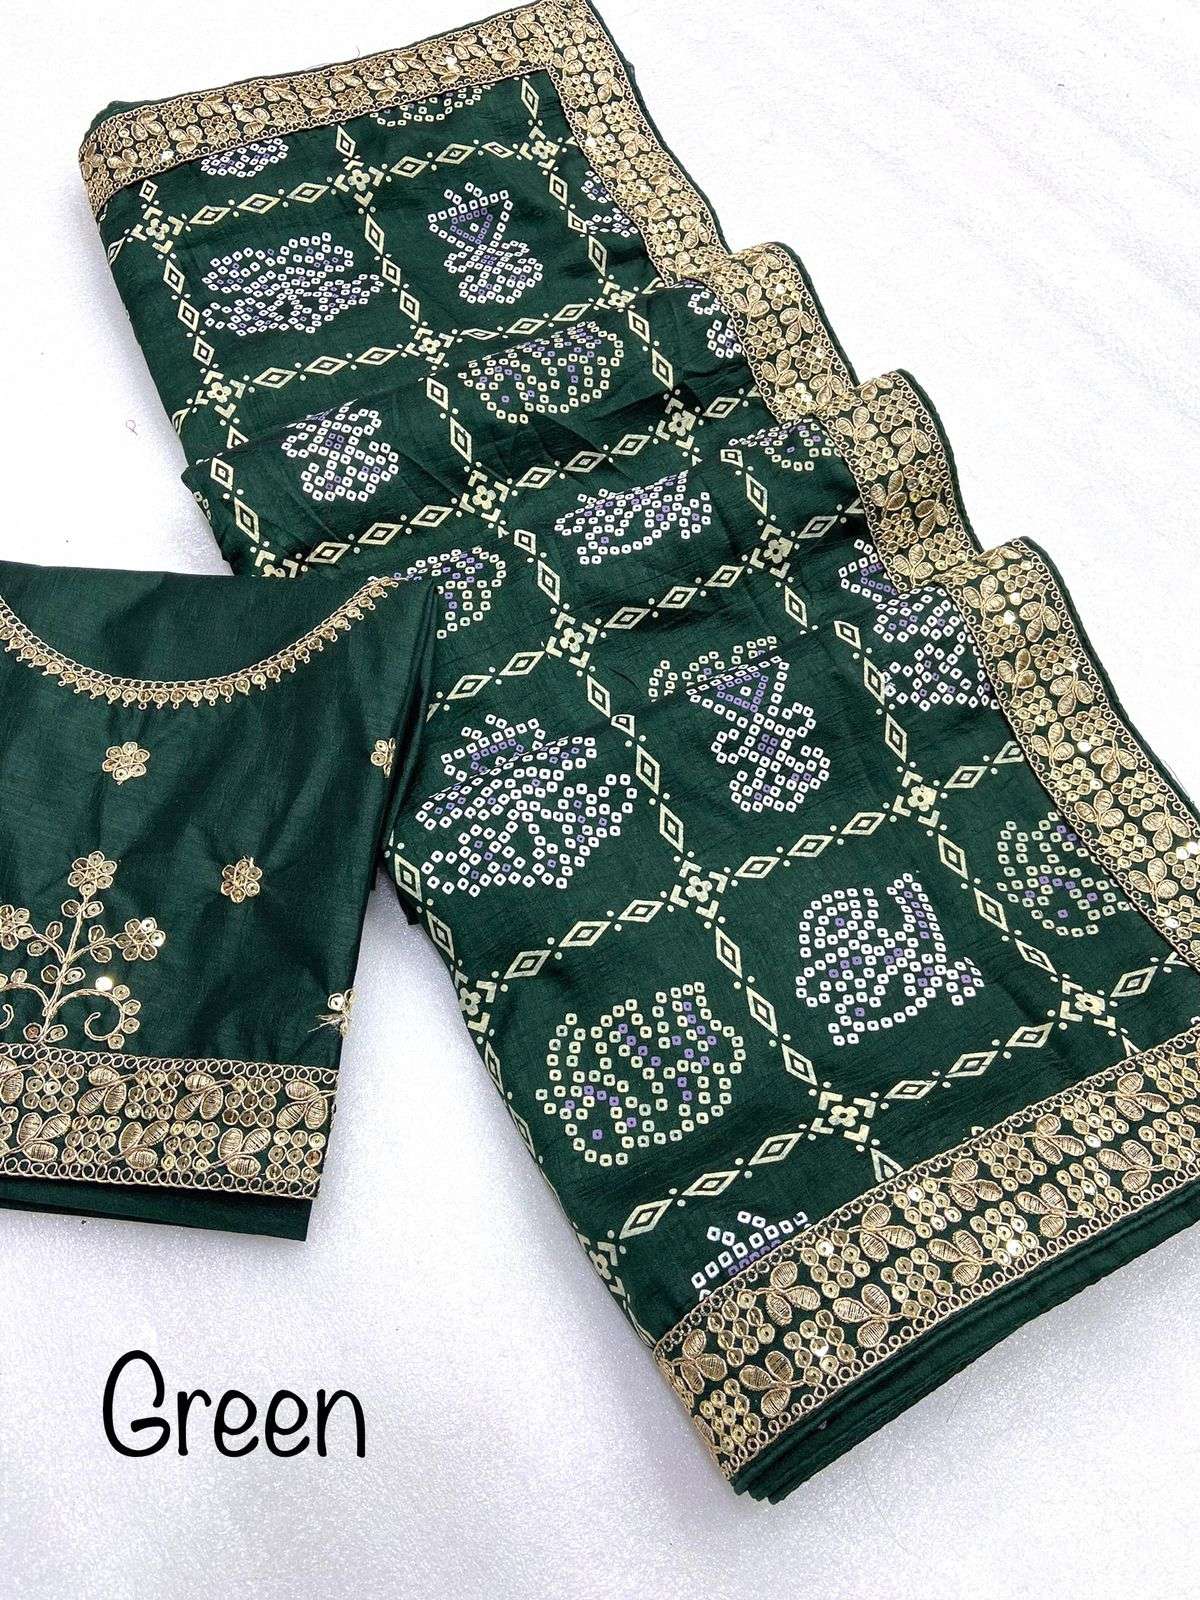 heavy vhichitra blooming saree with beautiful  khadi print in whole saree nd 5 mm seqance border with coding lace n sequnce work designer saree 